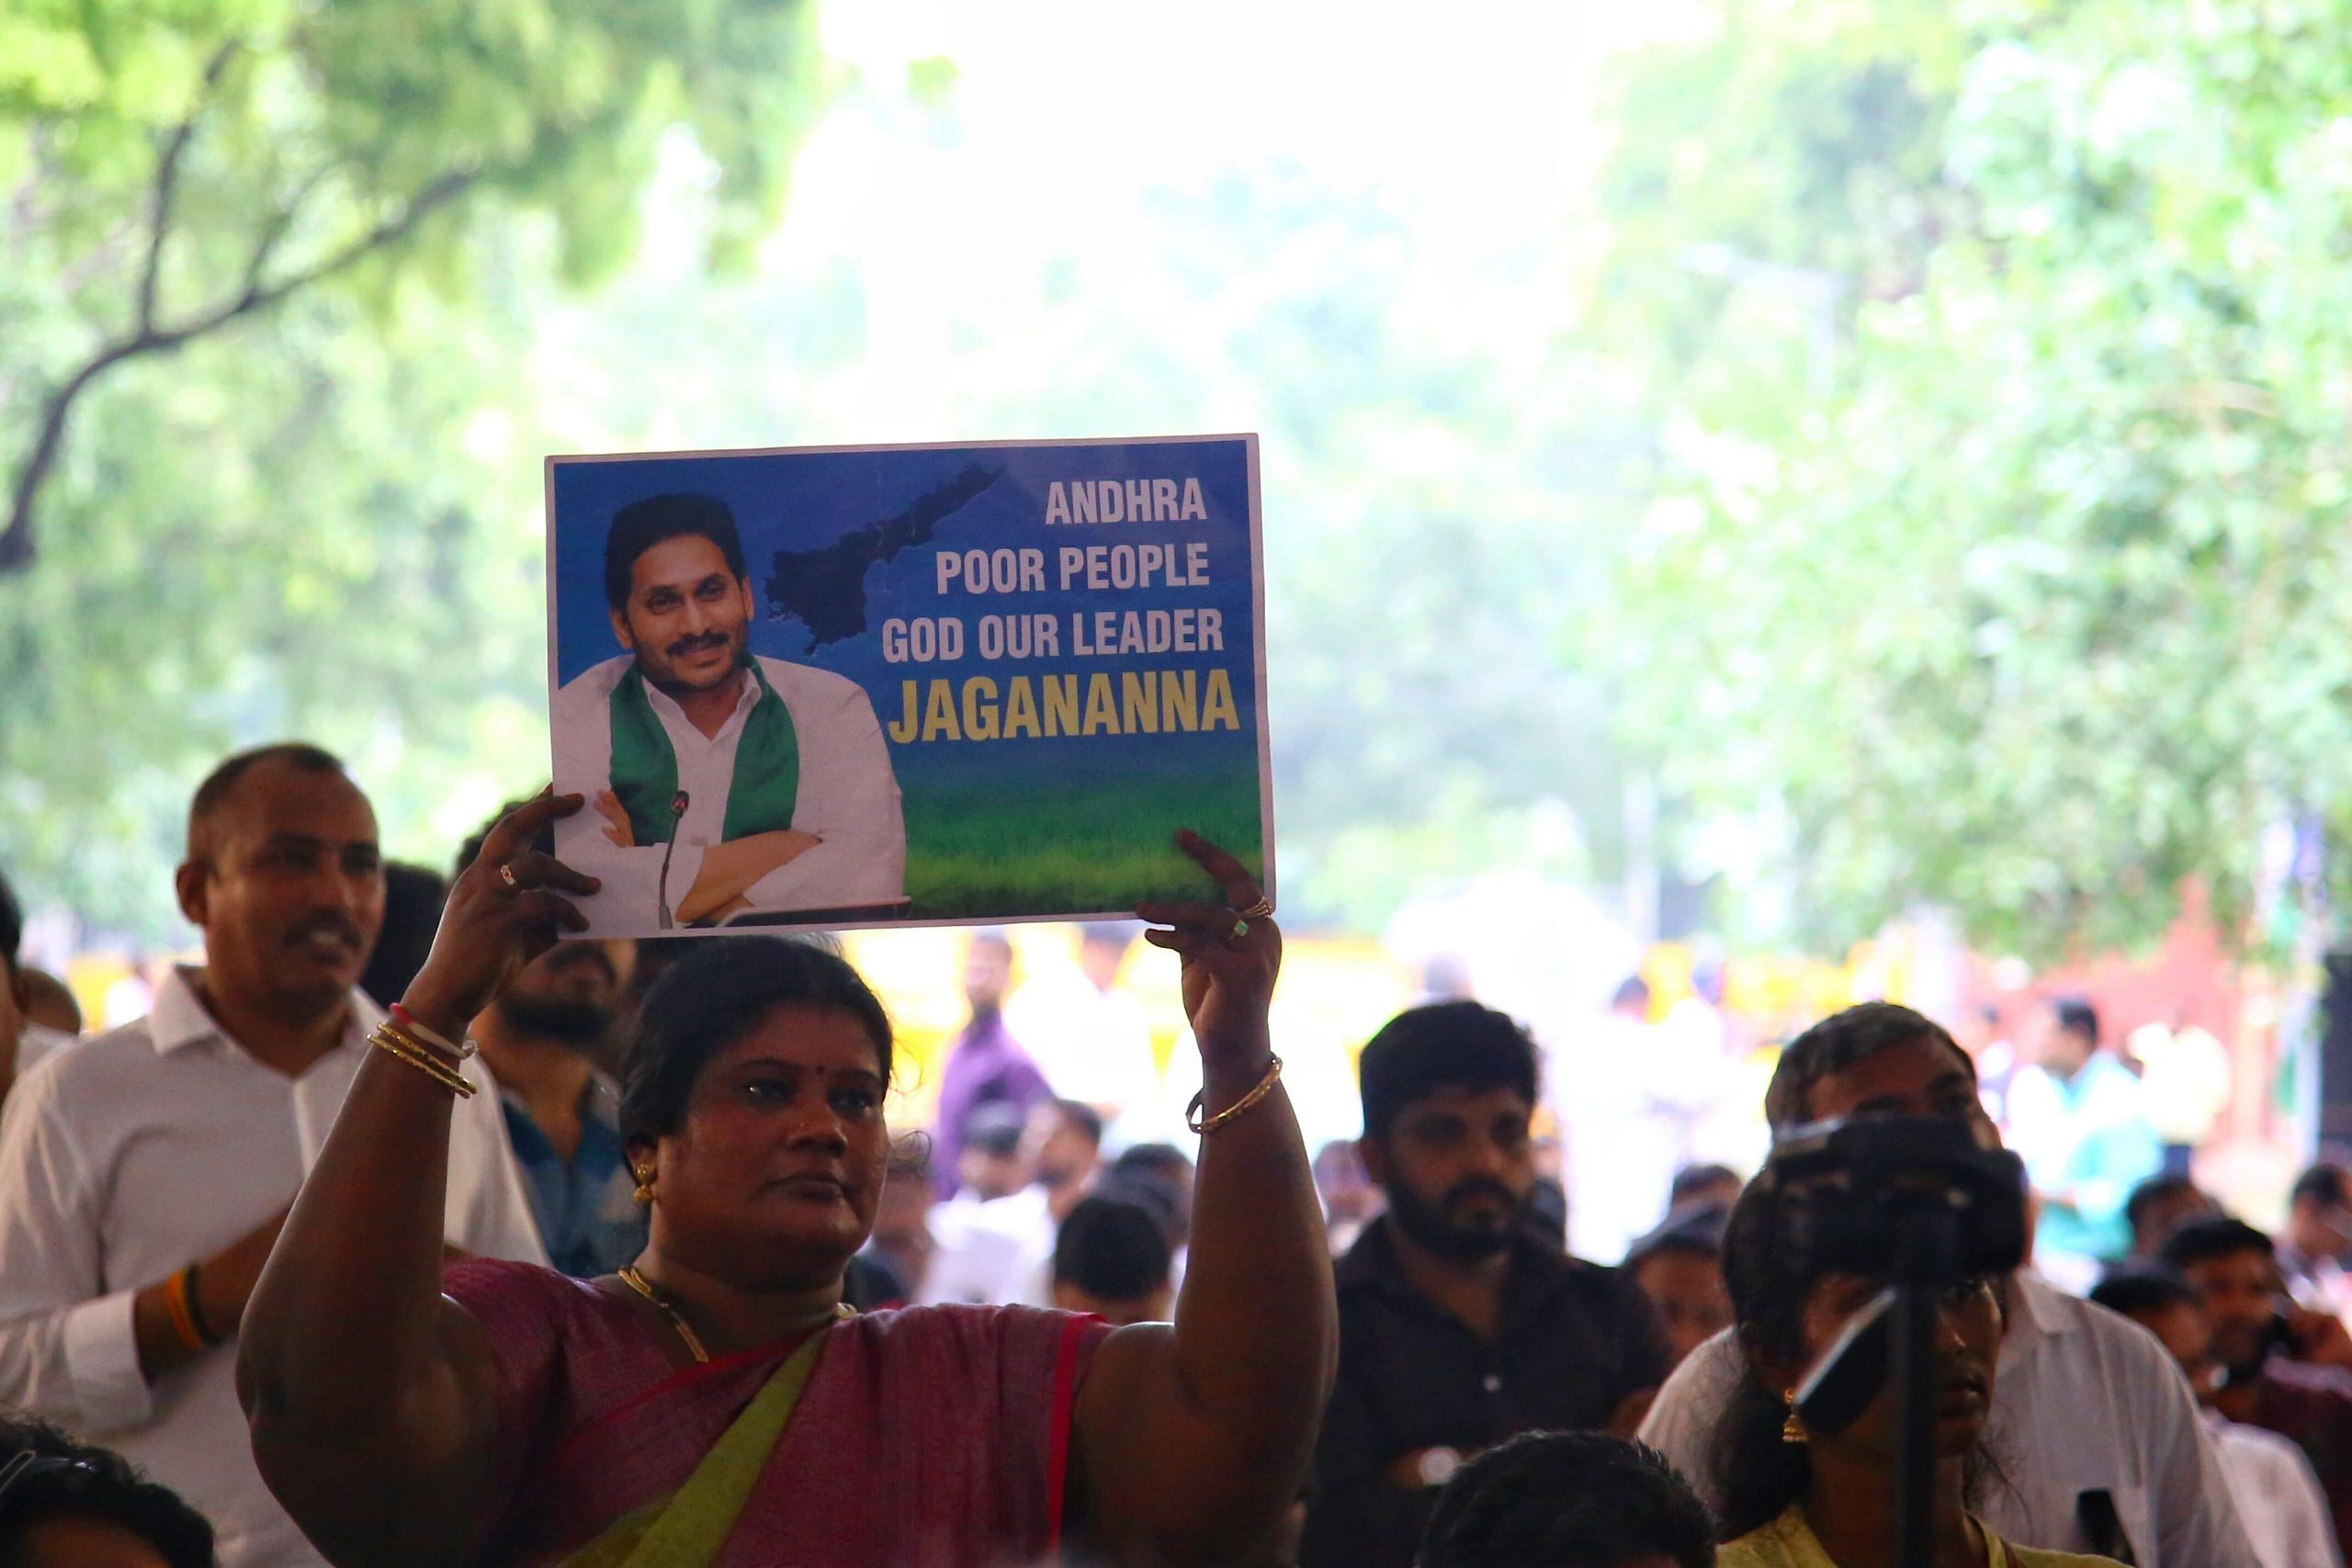 A supporter of YSRCP chief JS Jagan Mohan Reddy at the protest in New Delhi | Manisha Mondal | ThePrint